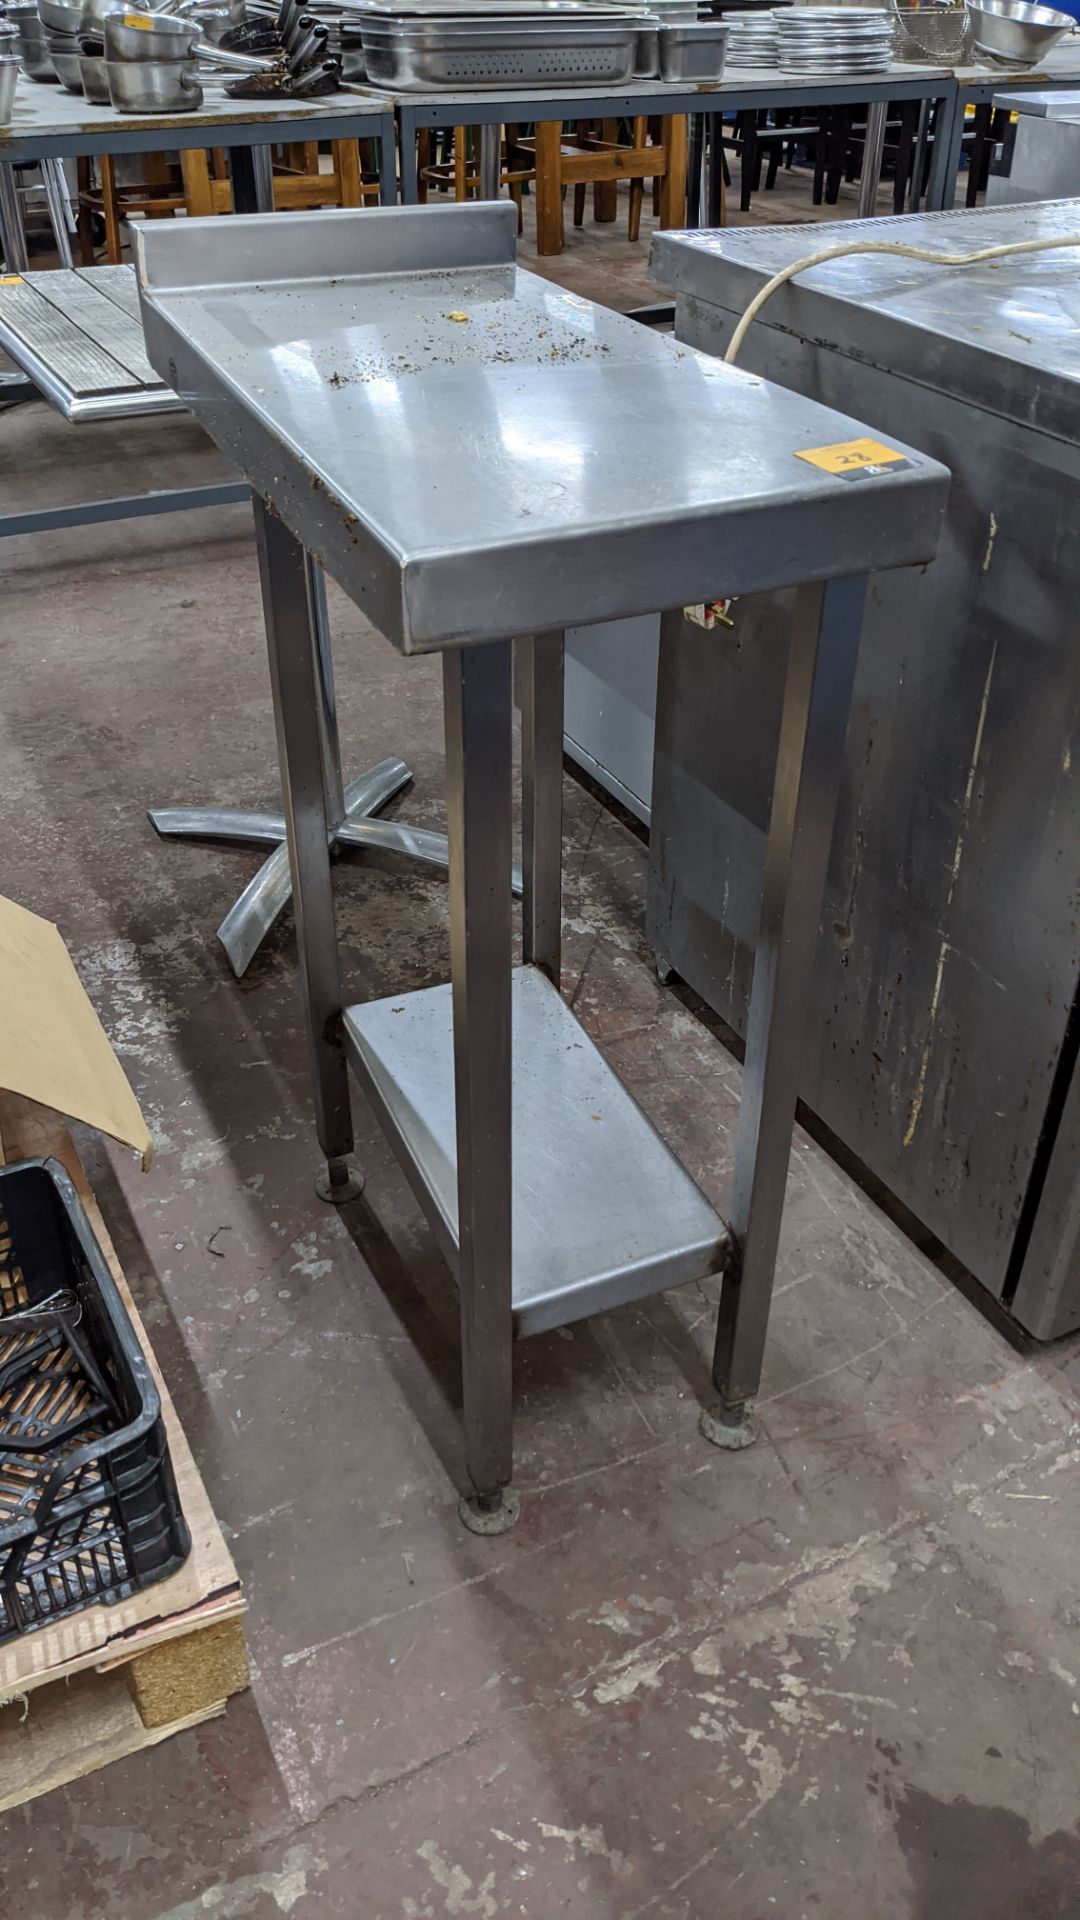 Slimline twin tier stainless steel table - Image 2 of 3